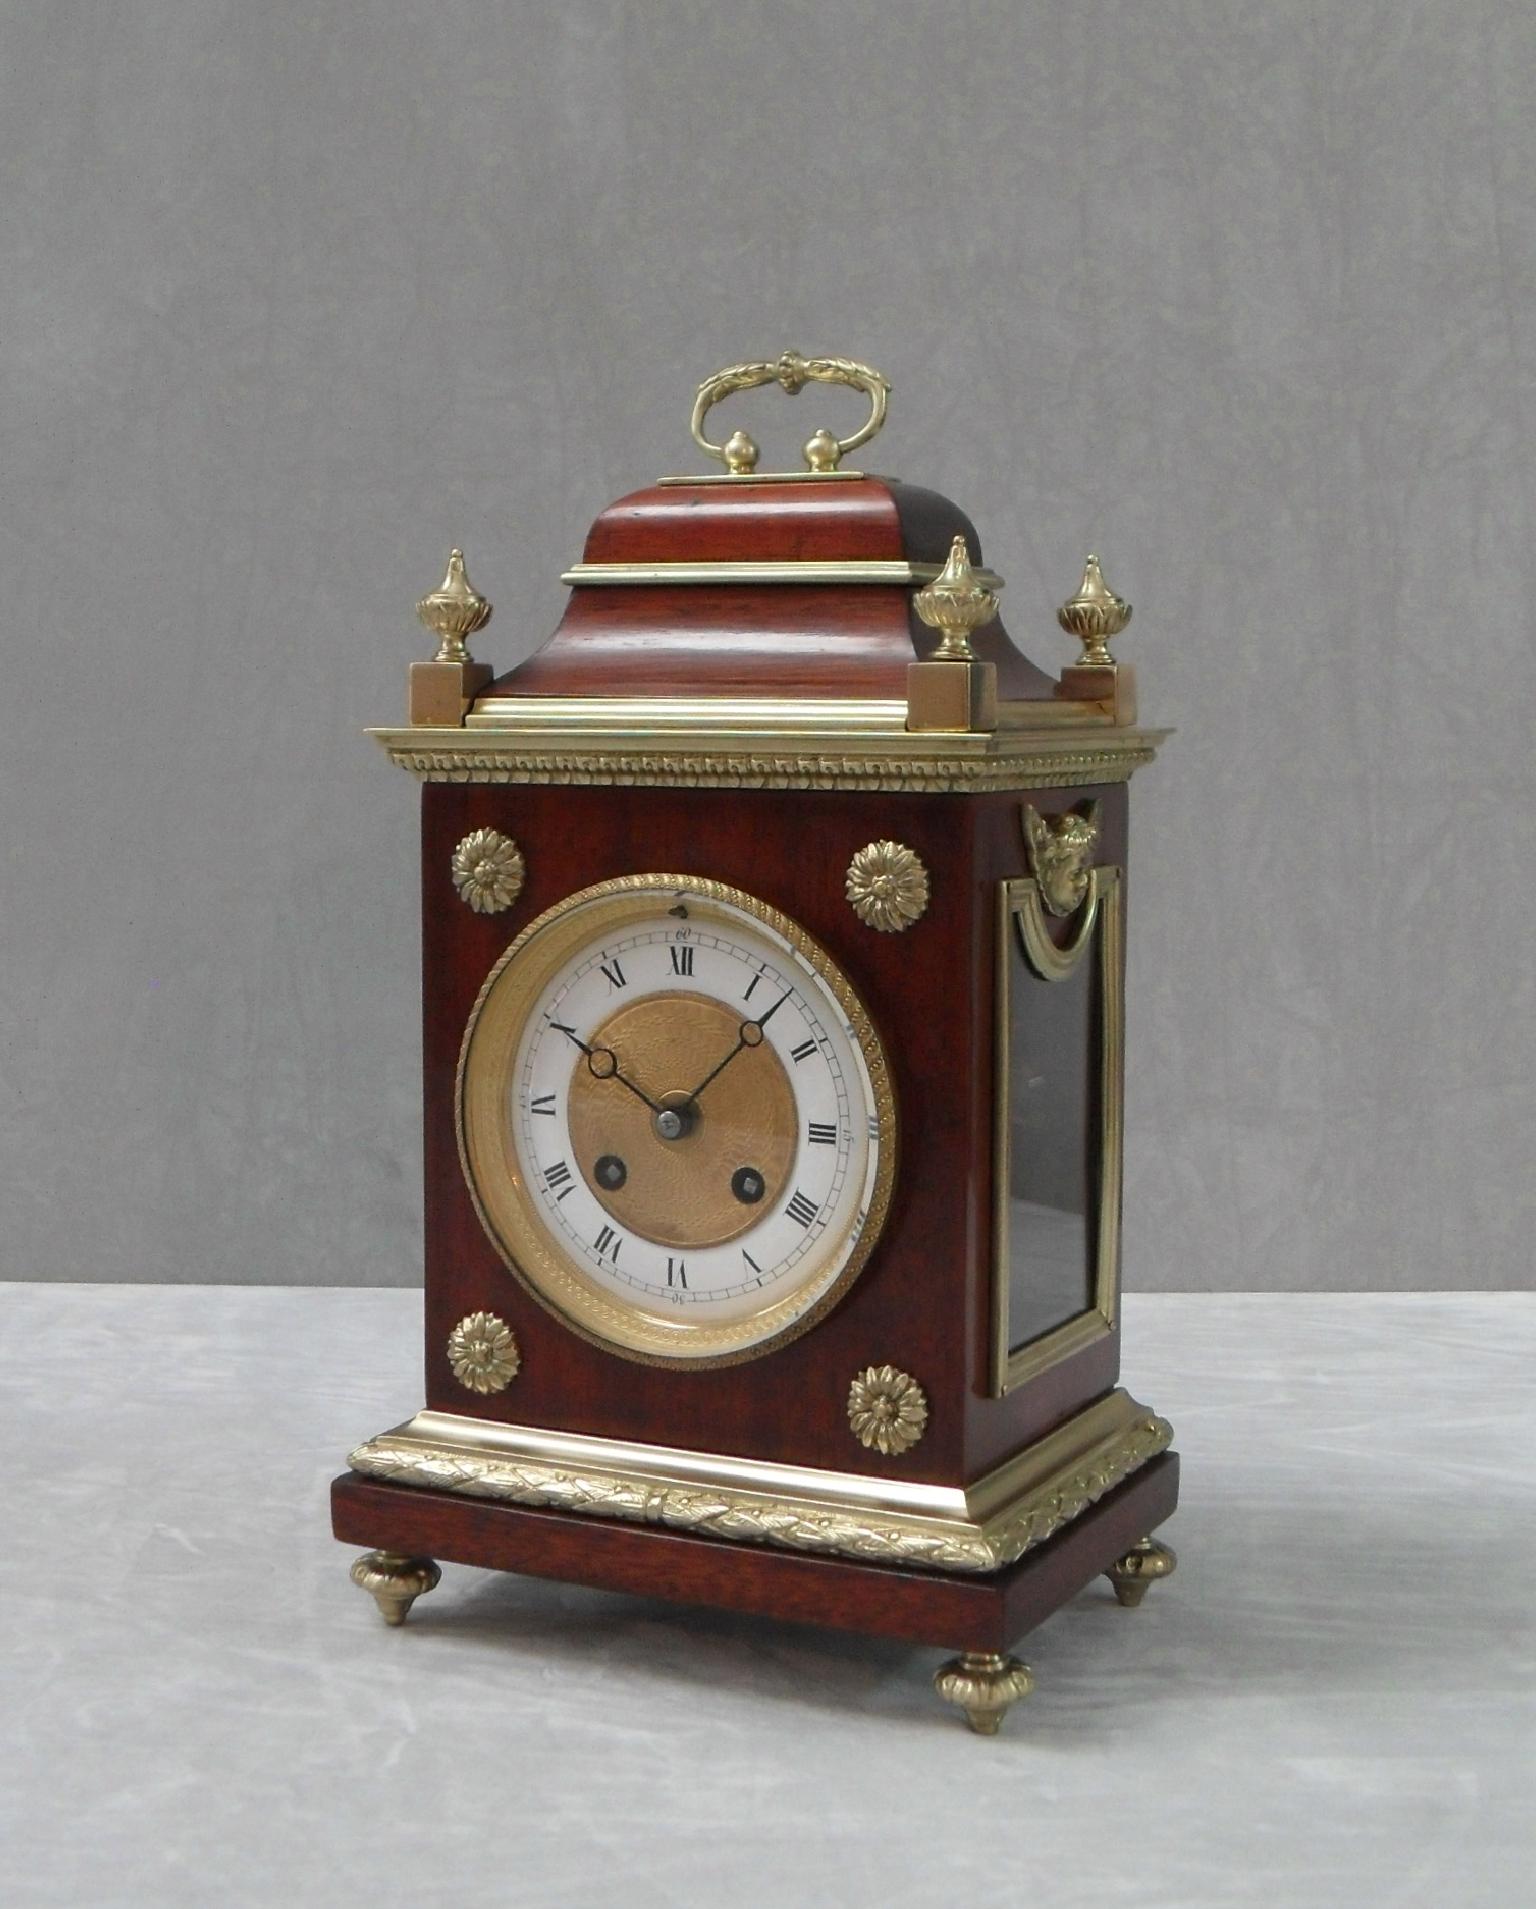 An extremely good quality French Belle Epoque mahogany mantel clock with side viewing windows, decorative bronze gilt ormolu mounts and moulds finished with four finials to the top and carrying handle. The clock dial has an engine turned centre with